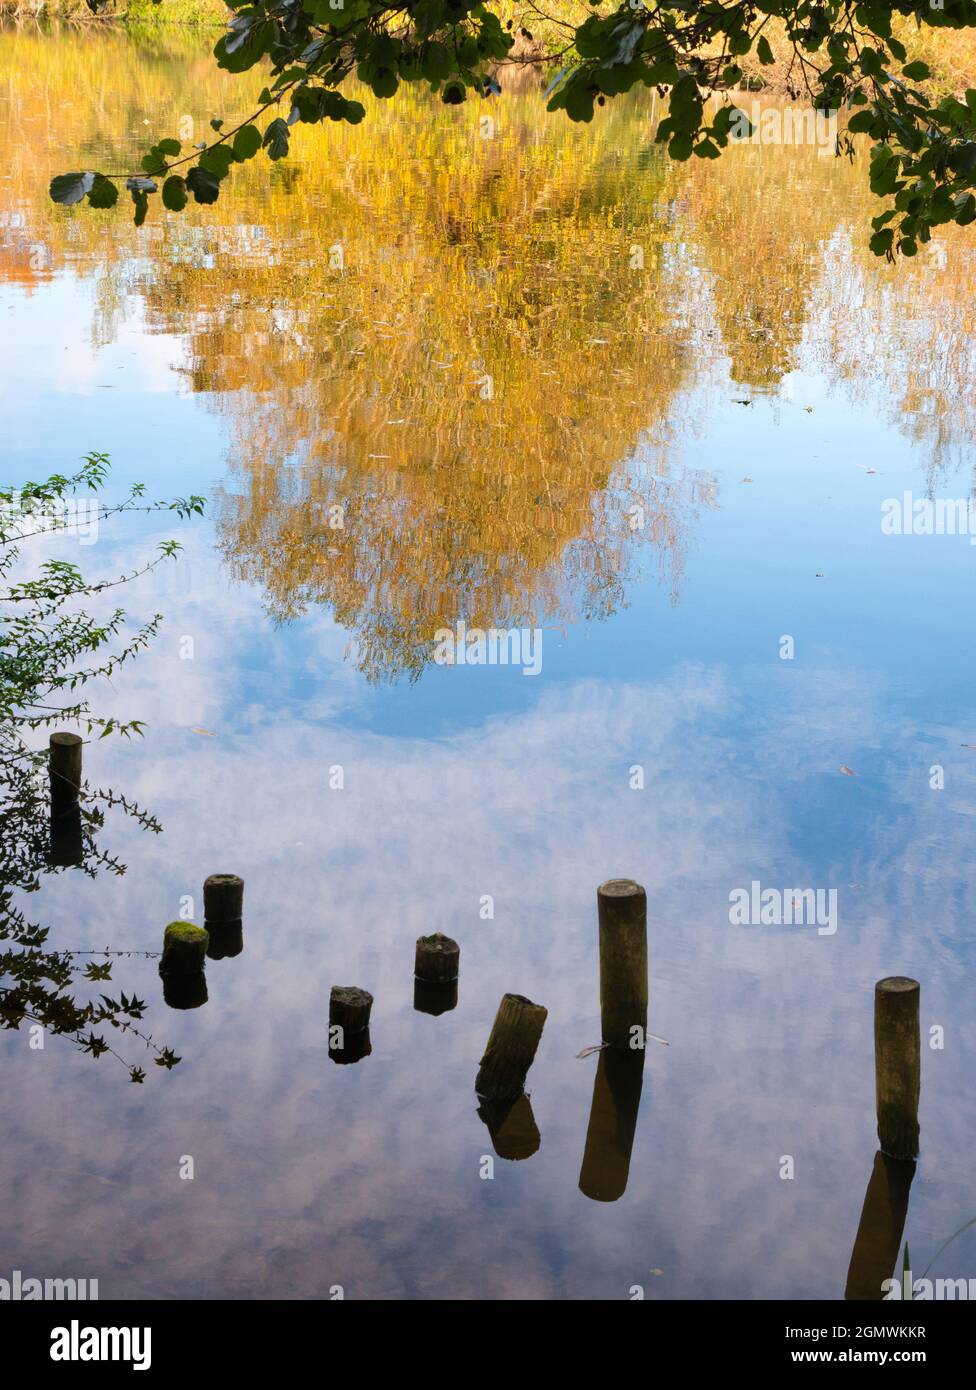 Abingdon, England - 24 October 2018   This is a reflection of Autumn leaf color in the River Thames, just upstream of the medieval Abingdon Bridge. Stock Photo